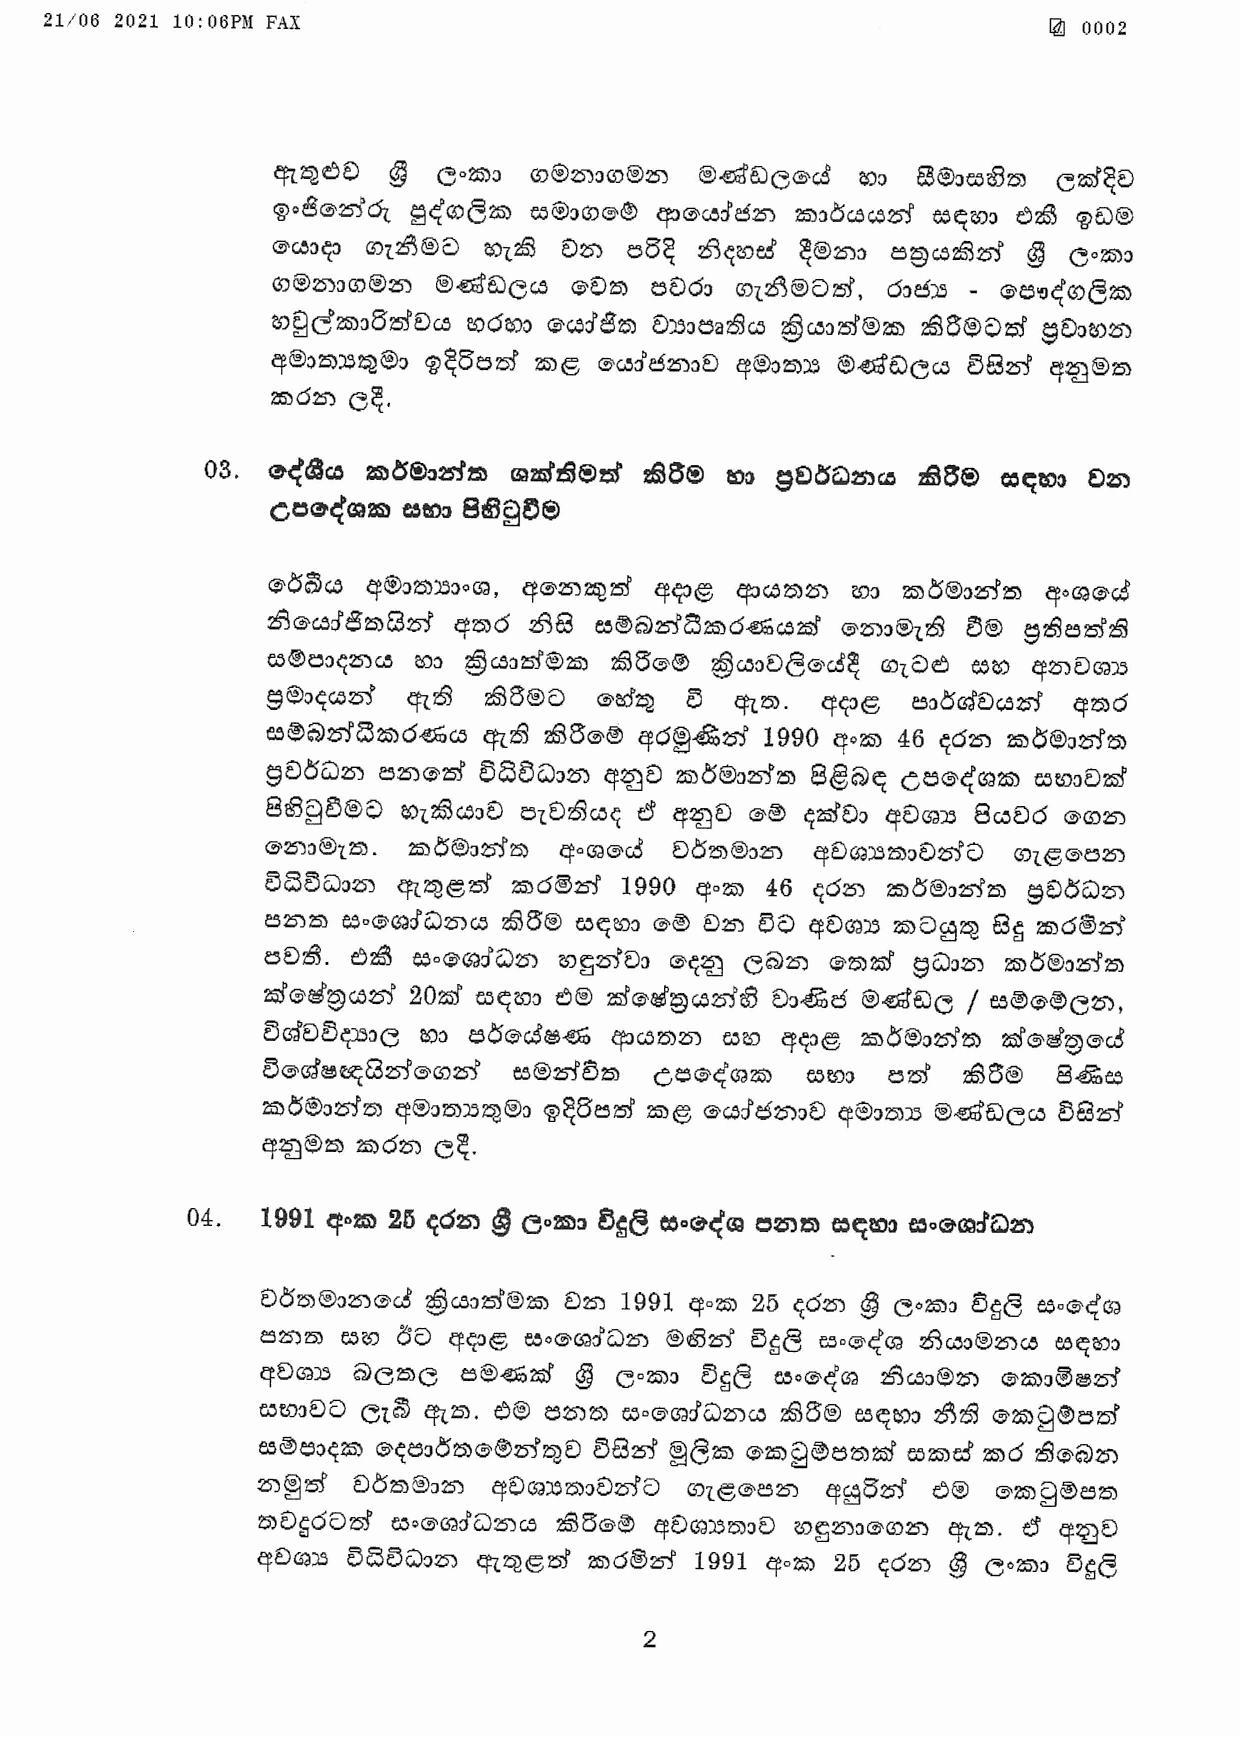 Cabinet Decision on 21.06.2021 page 002